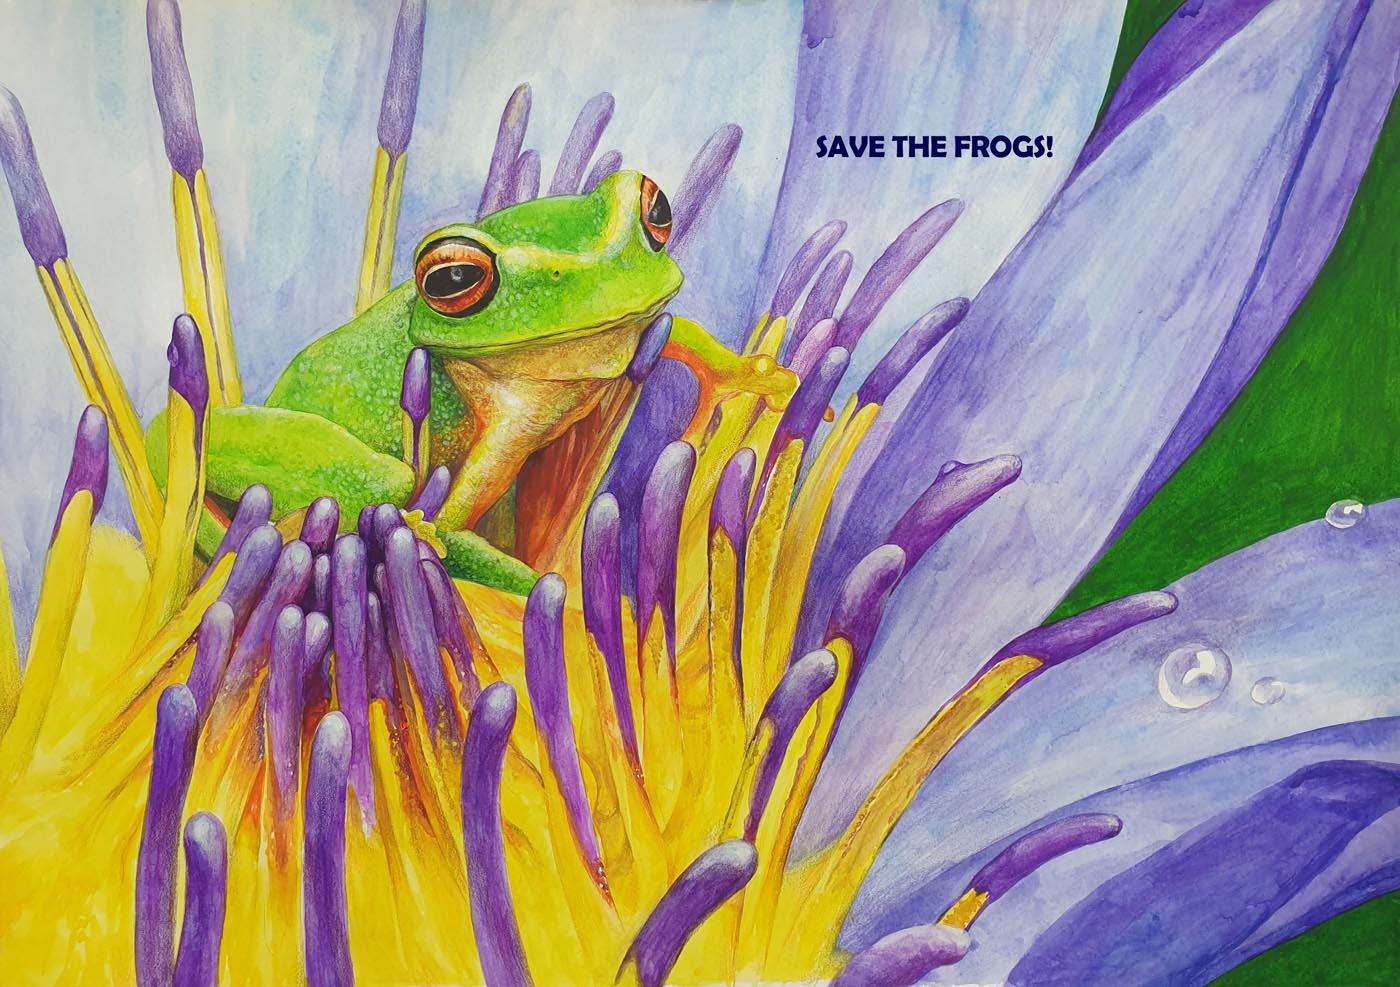 Hyunseo-Lee-Corée du Sud-2021-save-the-frogs-art-contest 2nd Place Winner